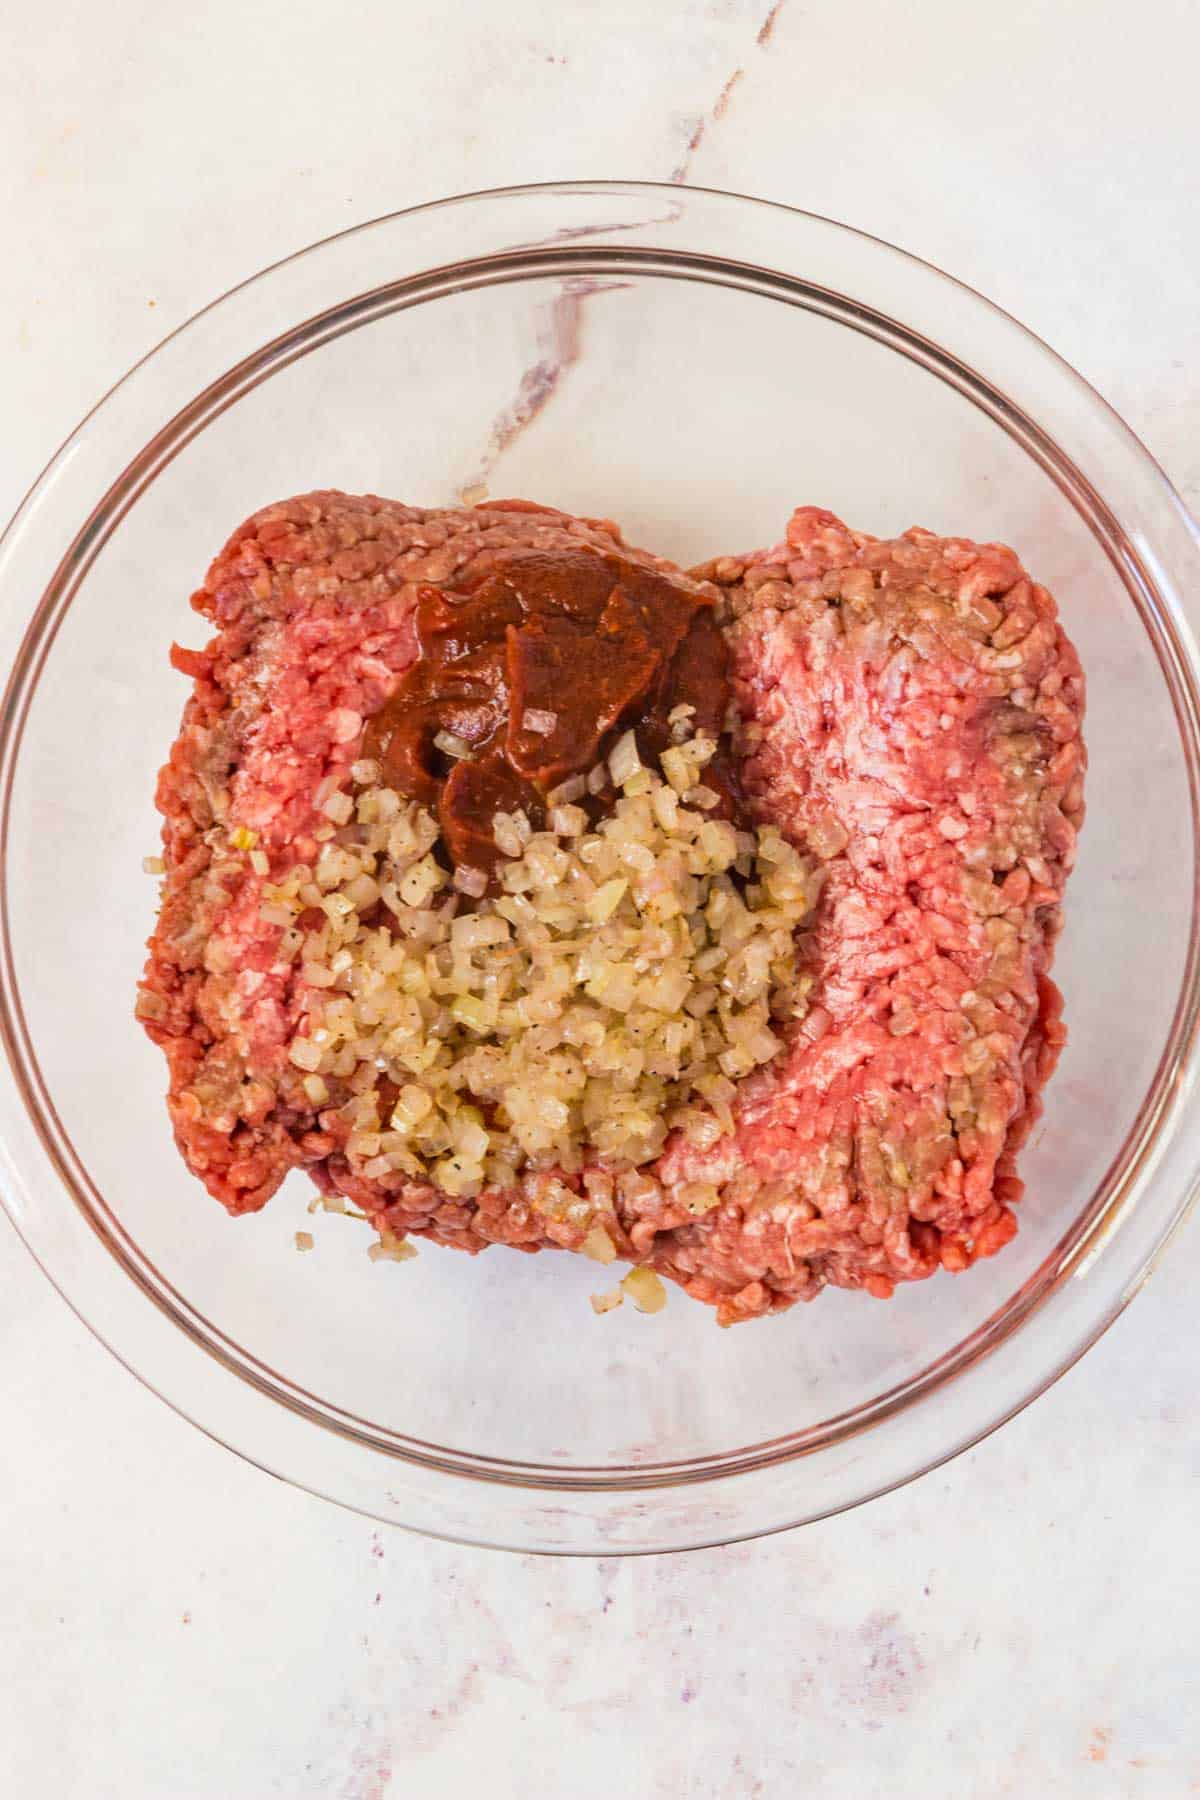 Raw ground beef, ketchup, and sauteed shallots in a glass bowl.